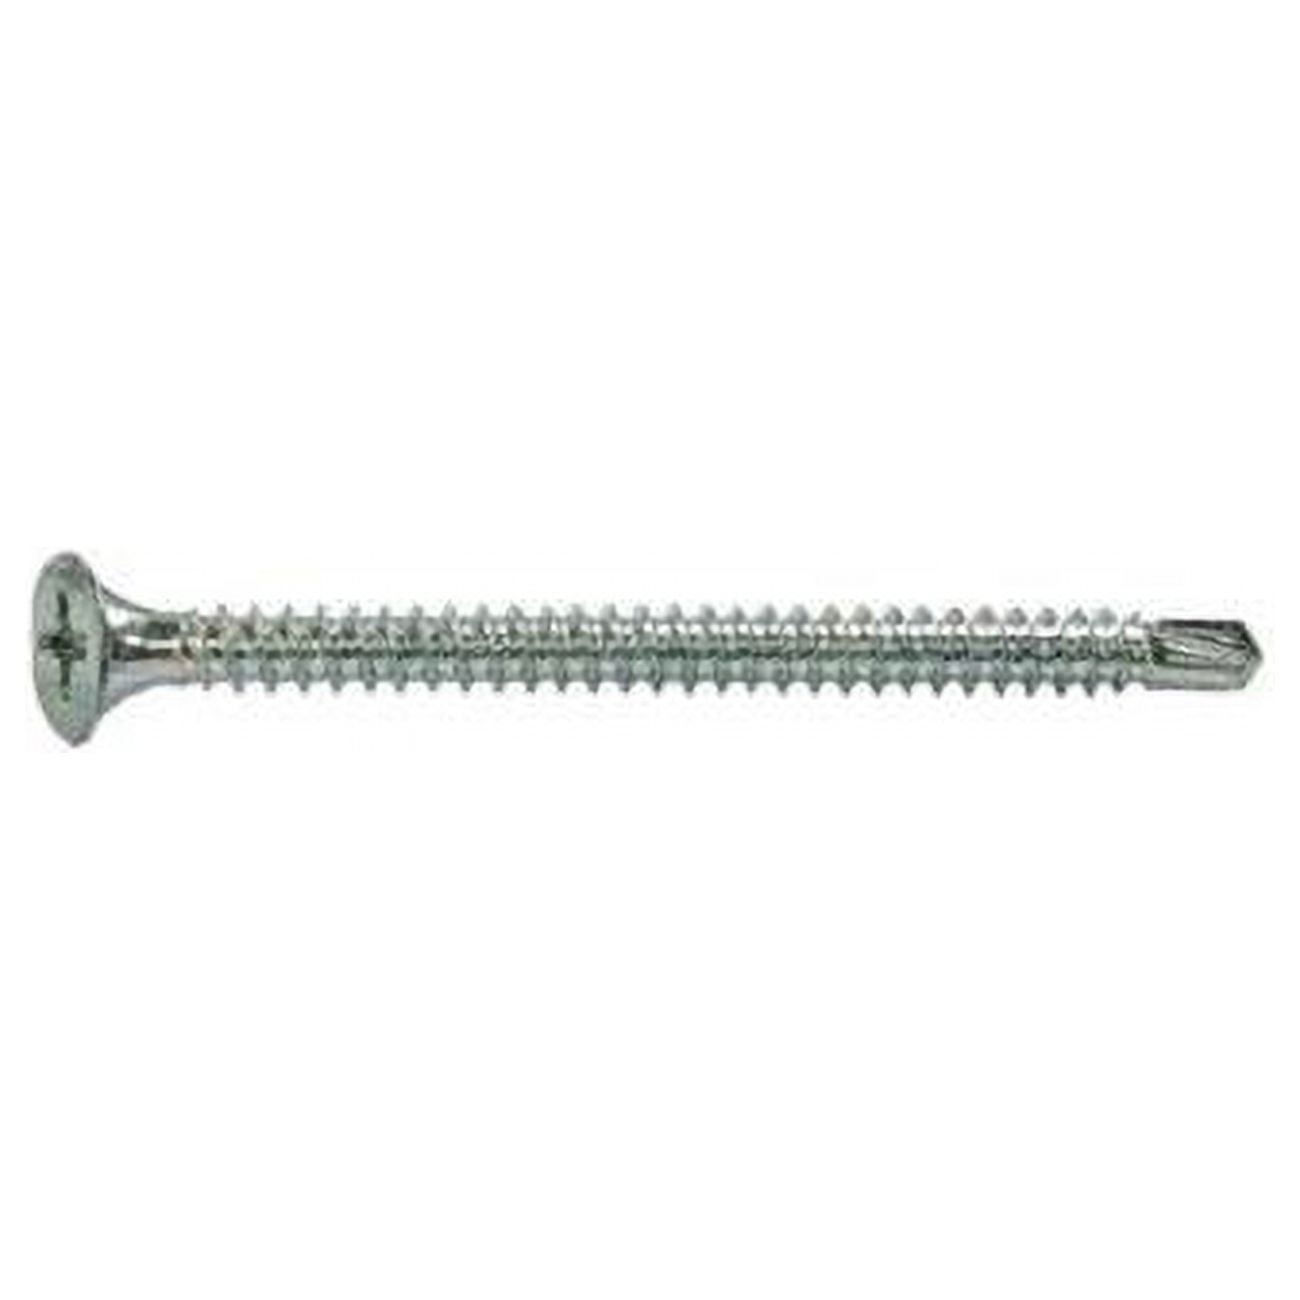 Picture of Grip-Rite 5025224 5 lbs No.6 x 1.625 in. Phillips Zinc-Plated Drywall Screws